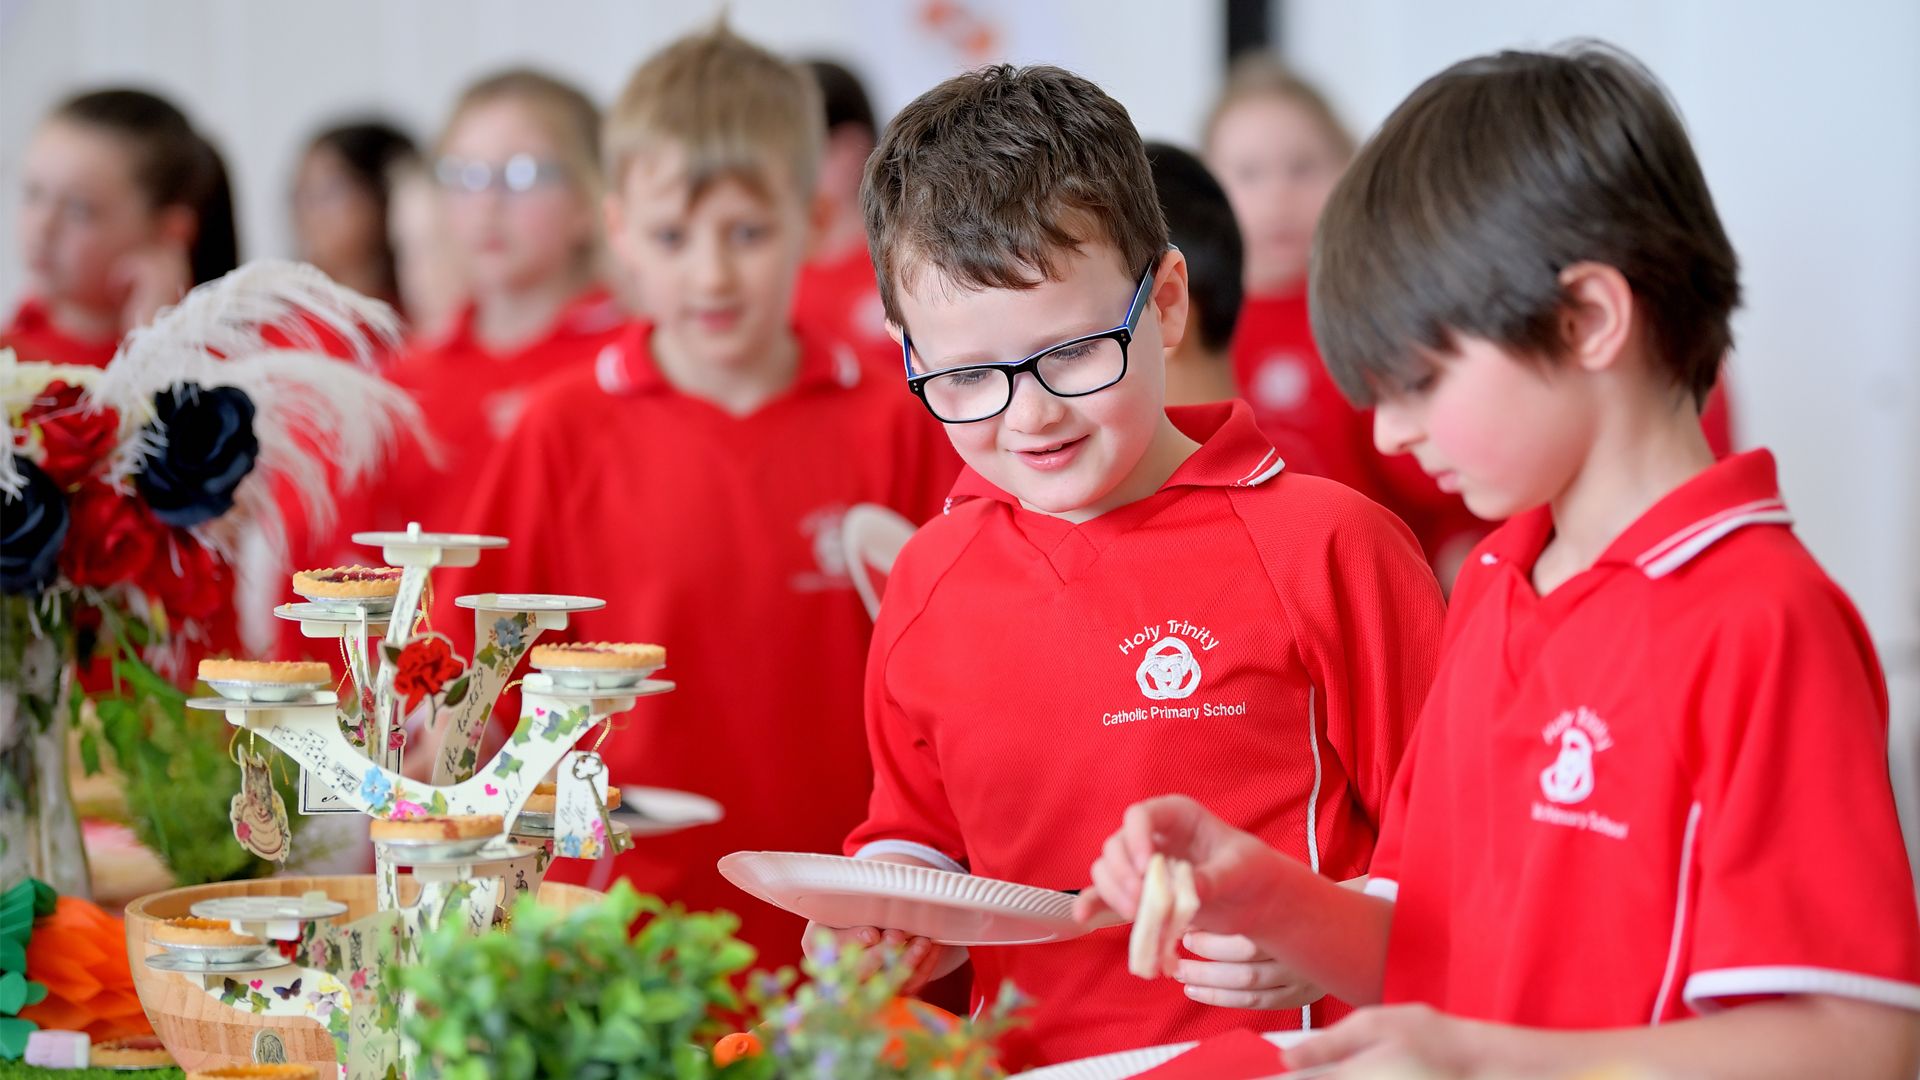 EitC and Liverpool Relish ‘Dish Out’ A Mad Hatters Tea Party For Primary School Pupils